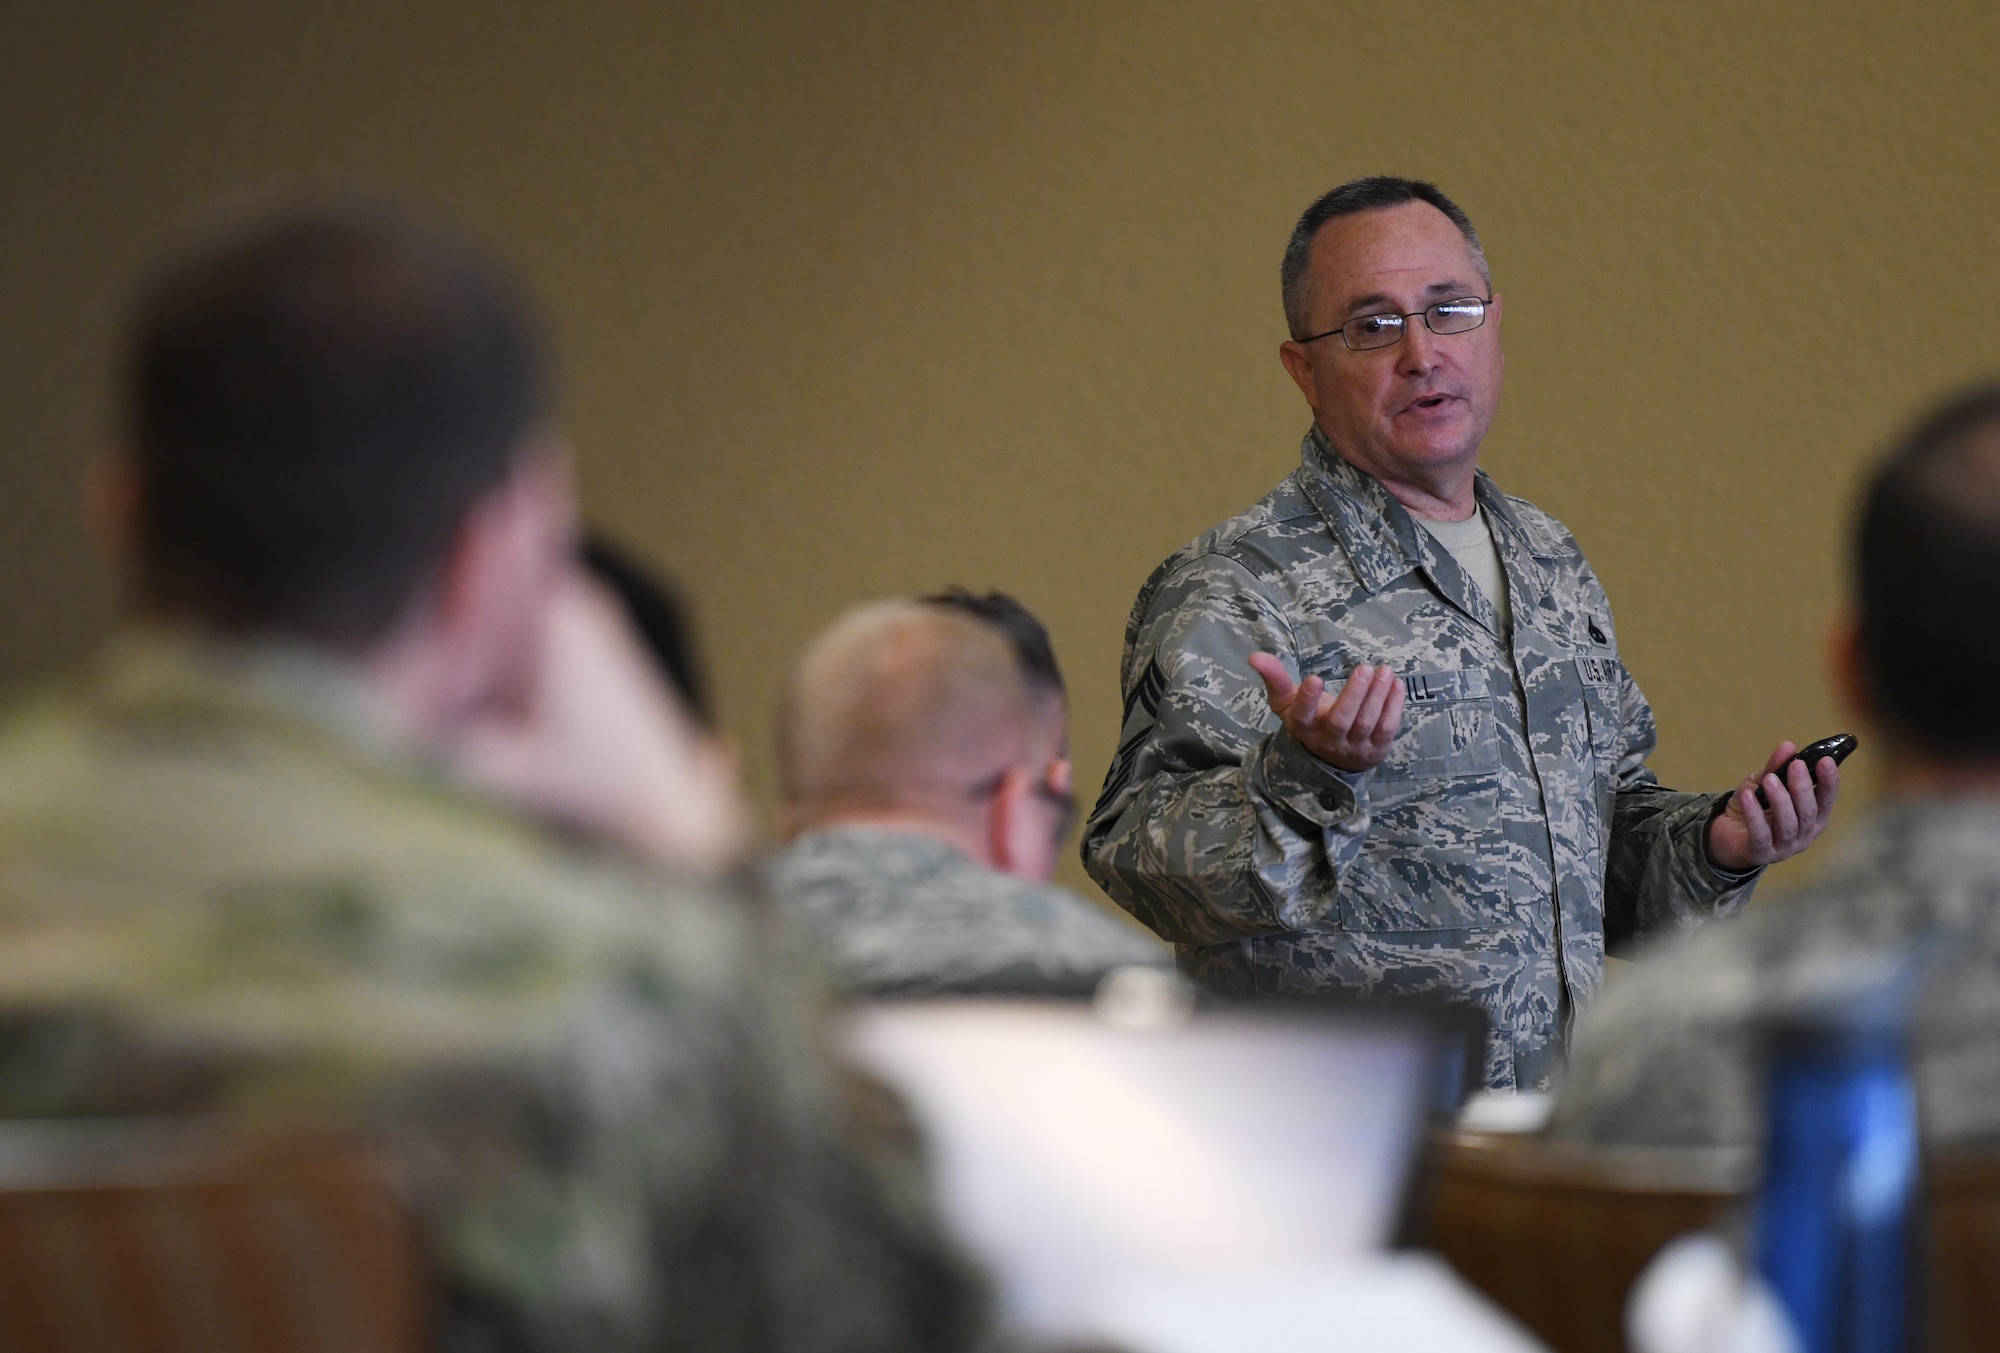 U.S. Air Force Chief Master Sgt. Robert Hill, Second Air Force training operations, briefs a group on the current training development of the command during the 2019 Career Field Managers Conference at Keesler Air Force Base, Mississippi, Feb. 7, 2019. The three-day conference, put on by the 81st Training Support Squadron, is designed to improve lines of communication between all levels of training development and delivery. This year the main topics of discussion were the blended learning approach to training, advancements in cyber training, advancing the technical training enterprise and augmented and virtual reality as training options. (U.S. Air Force photo by Master Sgt. Ryan Crane)